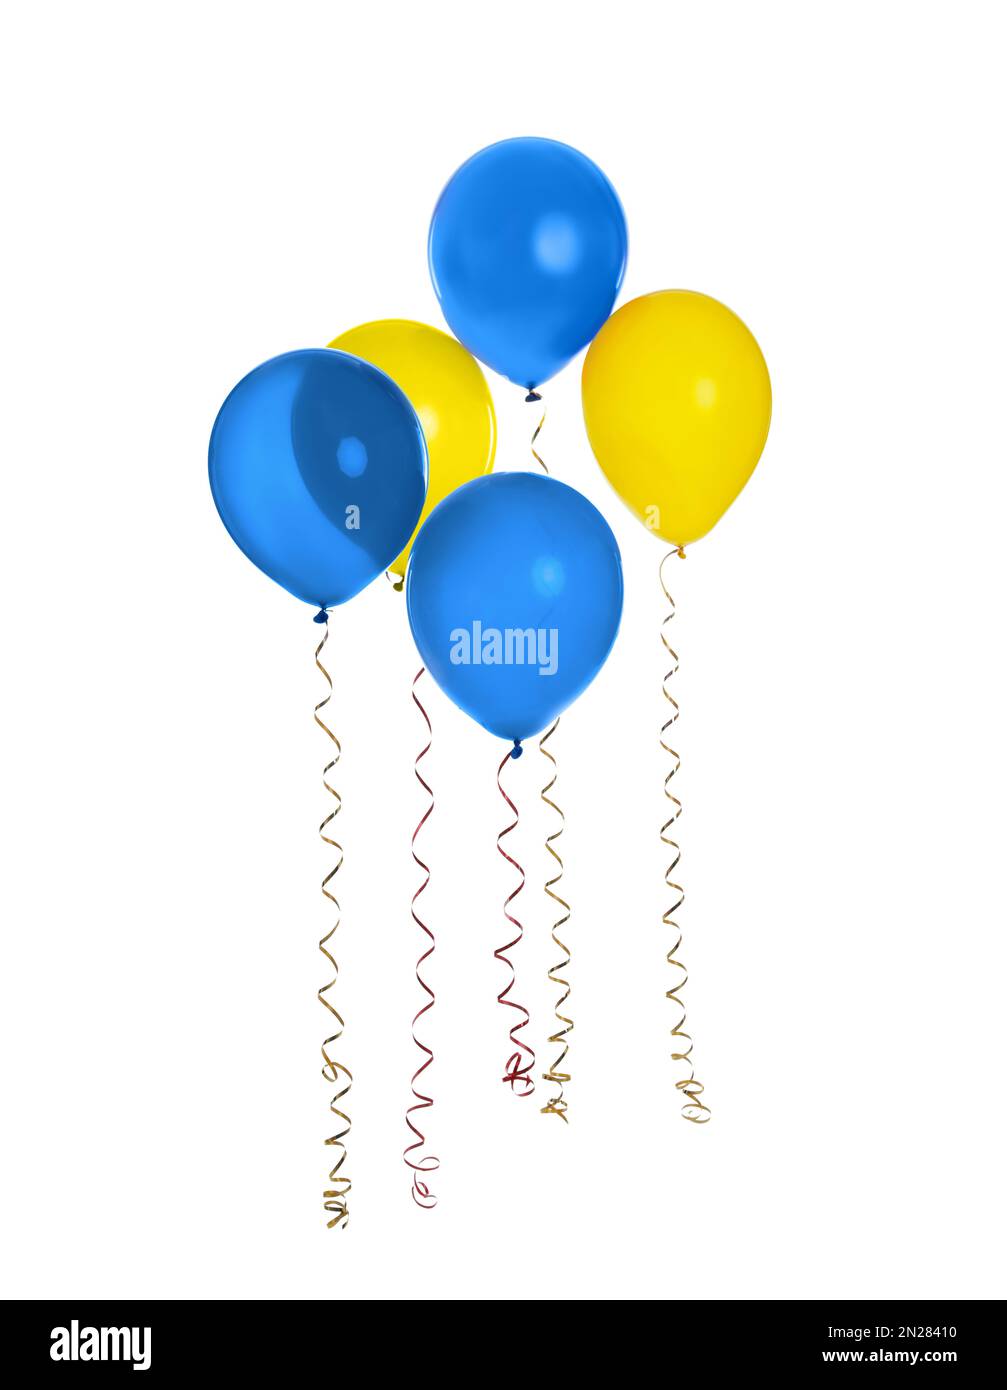 Many balloons in colors of Ukrainian flag on white background Stock Photo